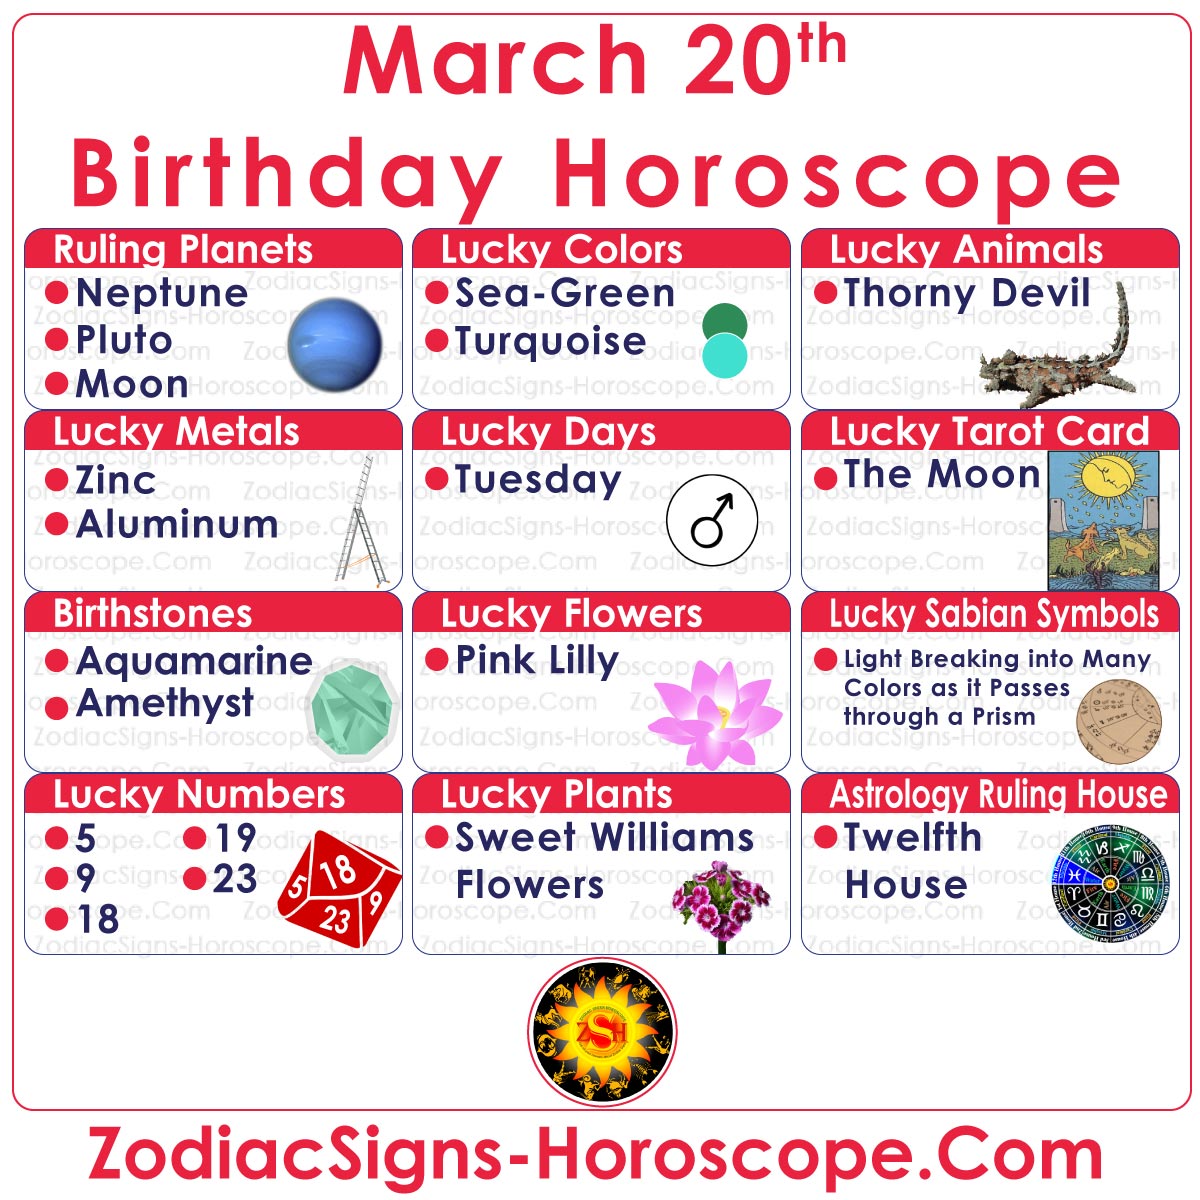 March 20th born Lucky Numbers, Days, Colors and more